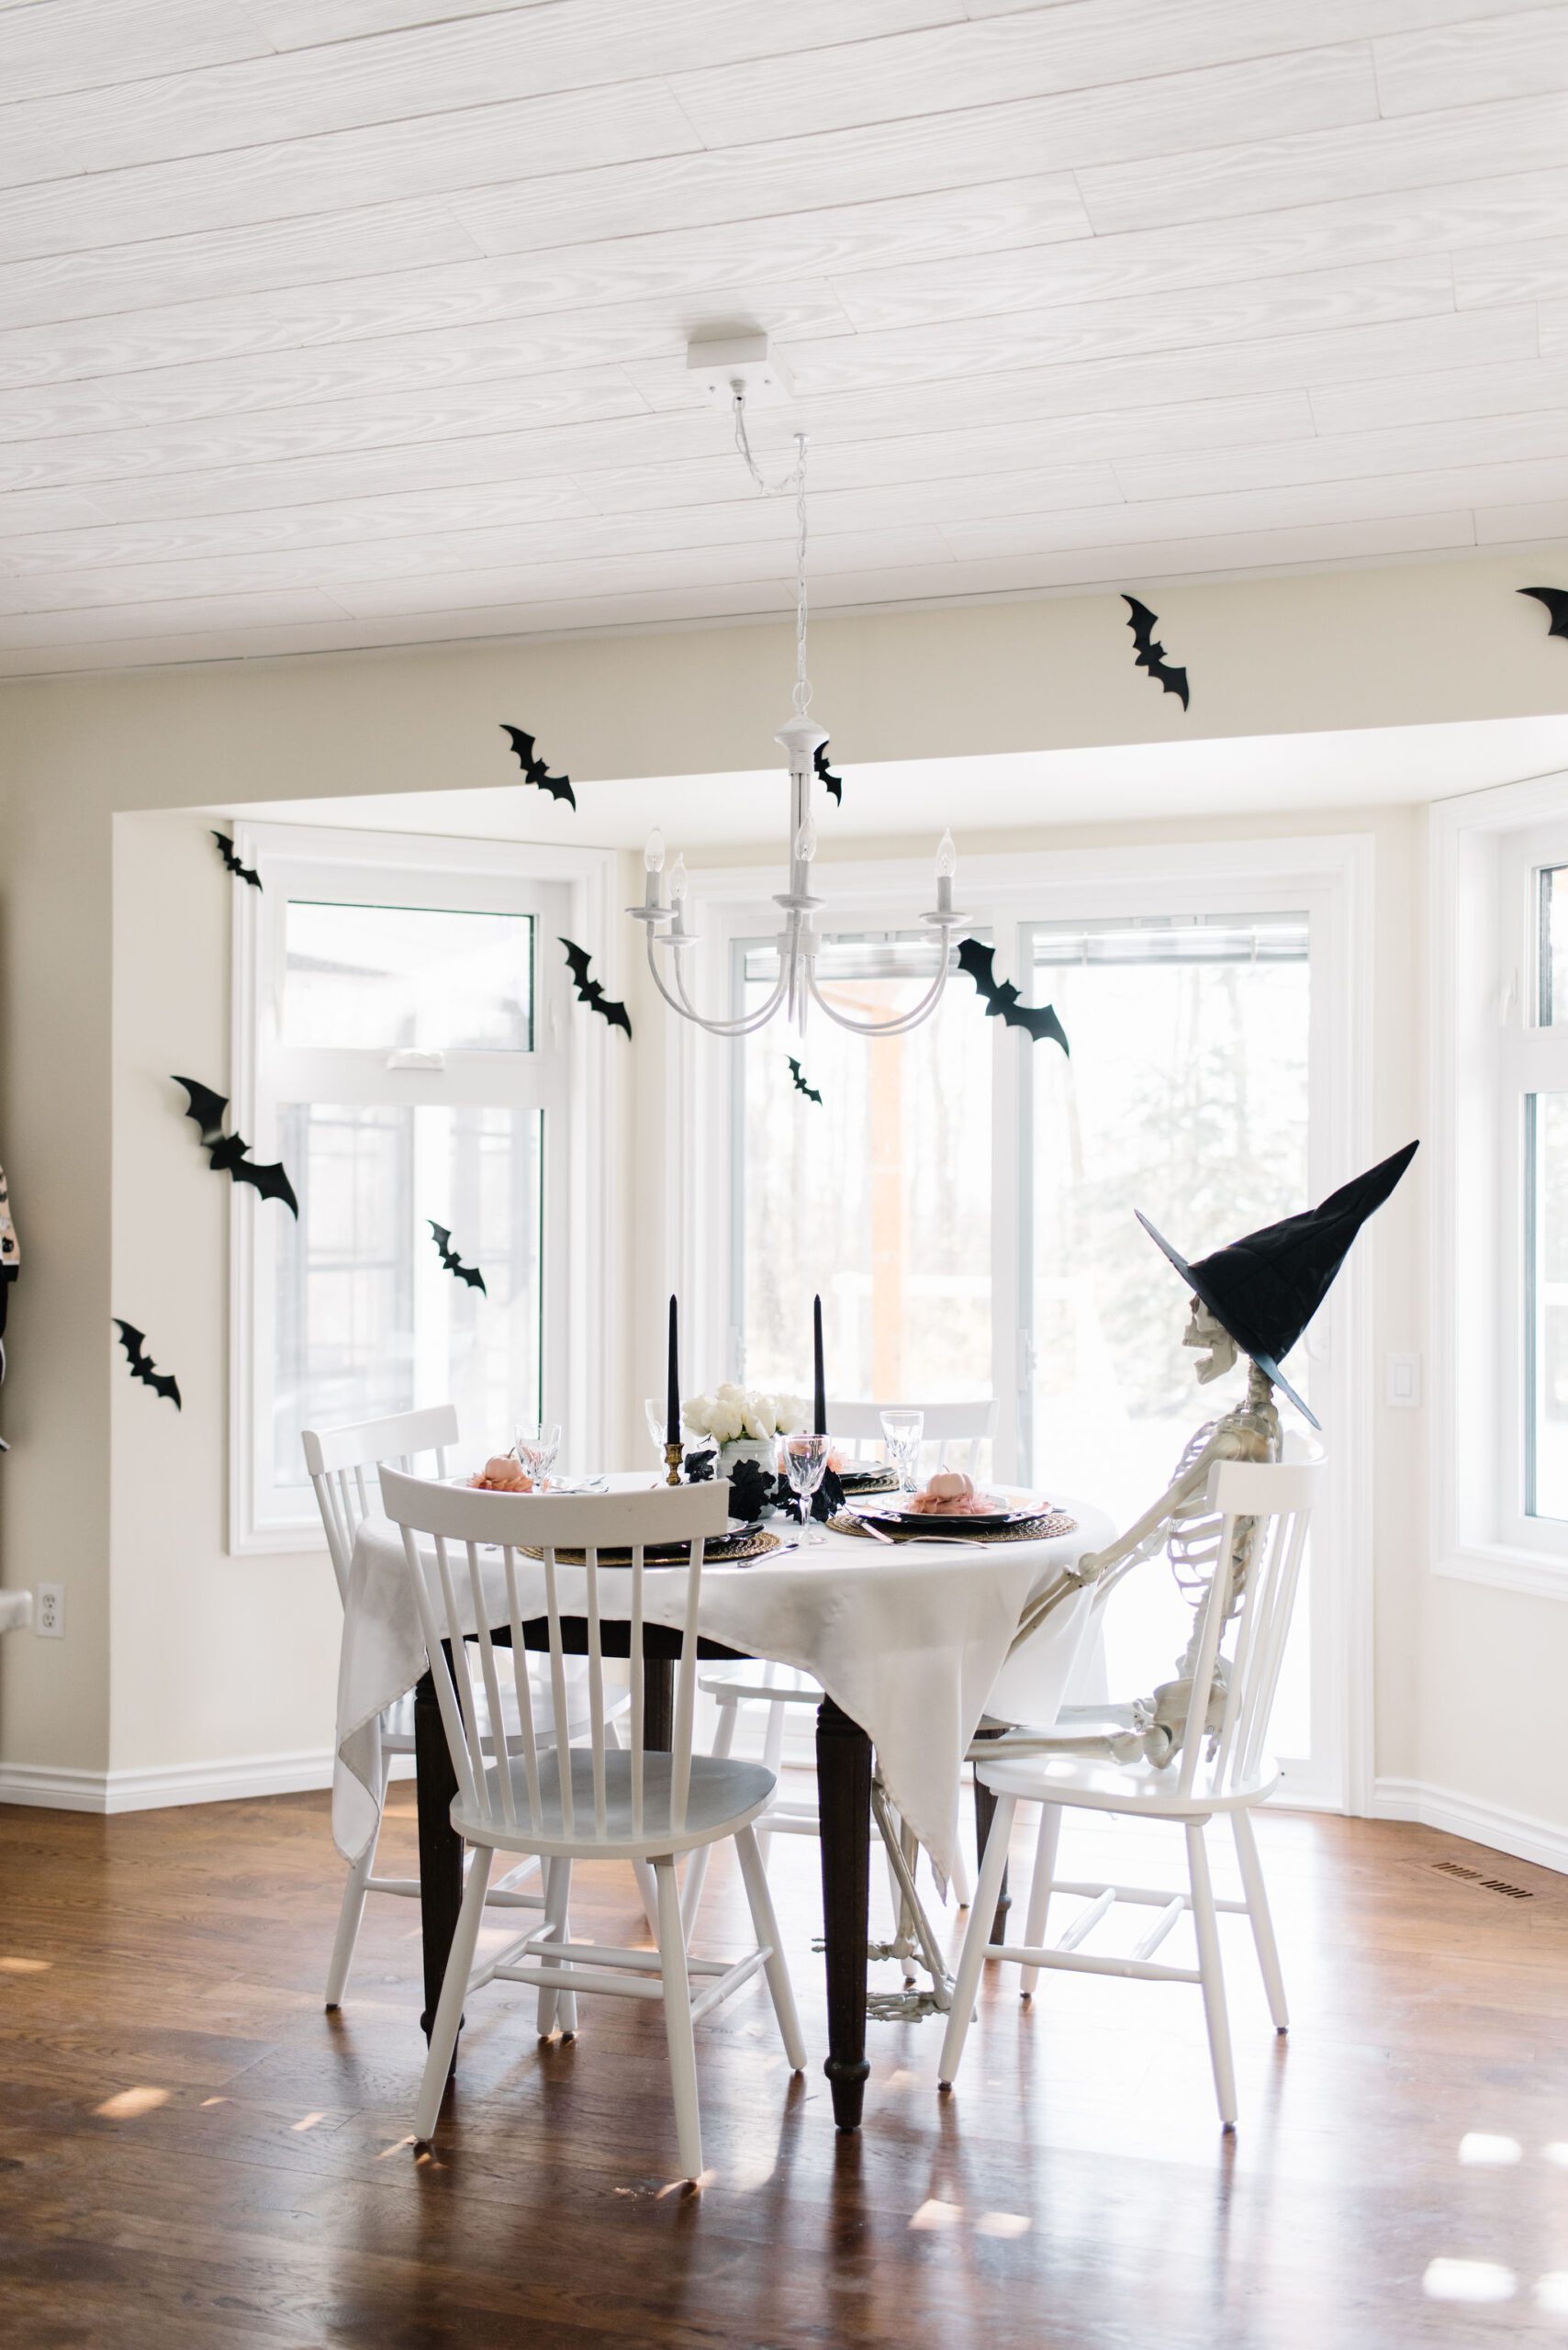 A skeleton sits at a halloween table with bats hung above